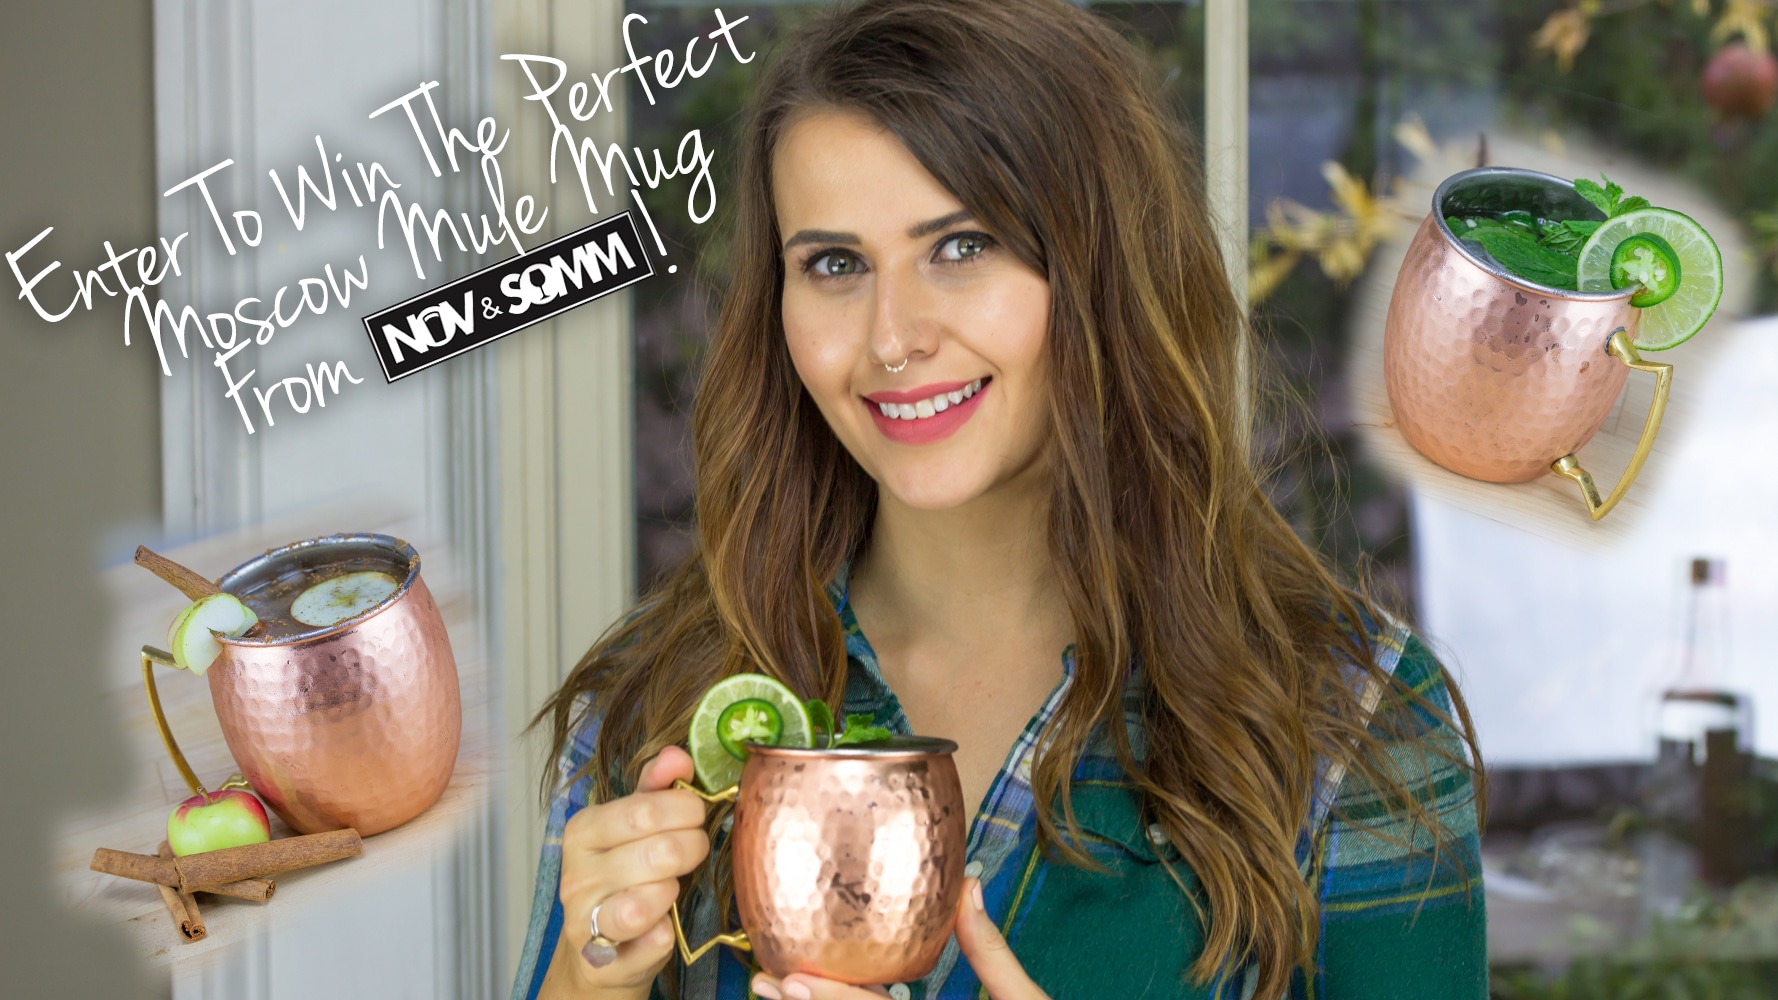 Enter to Win a Perfect Moscow Mule Mug from Nov & Somm!